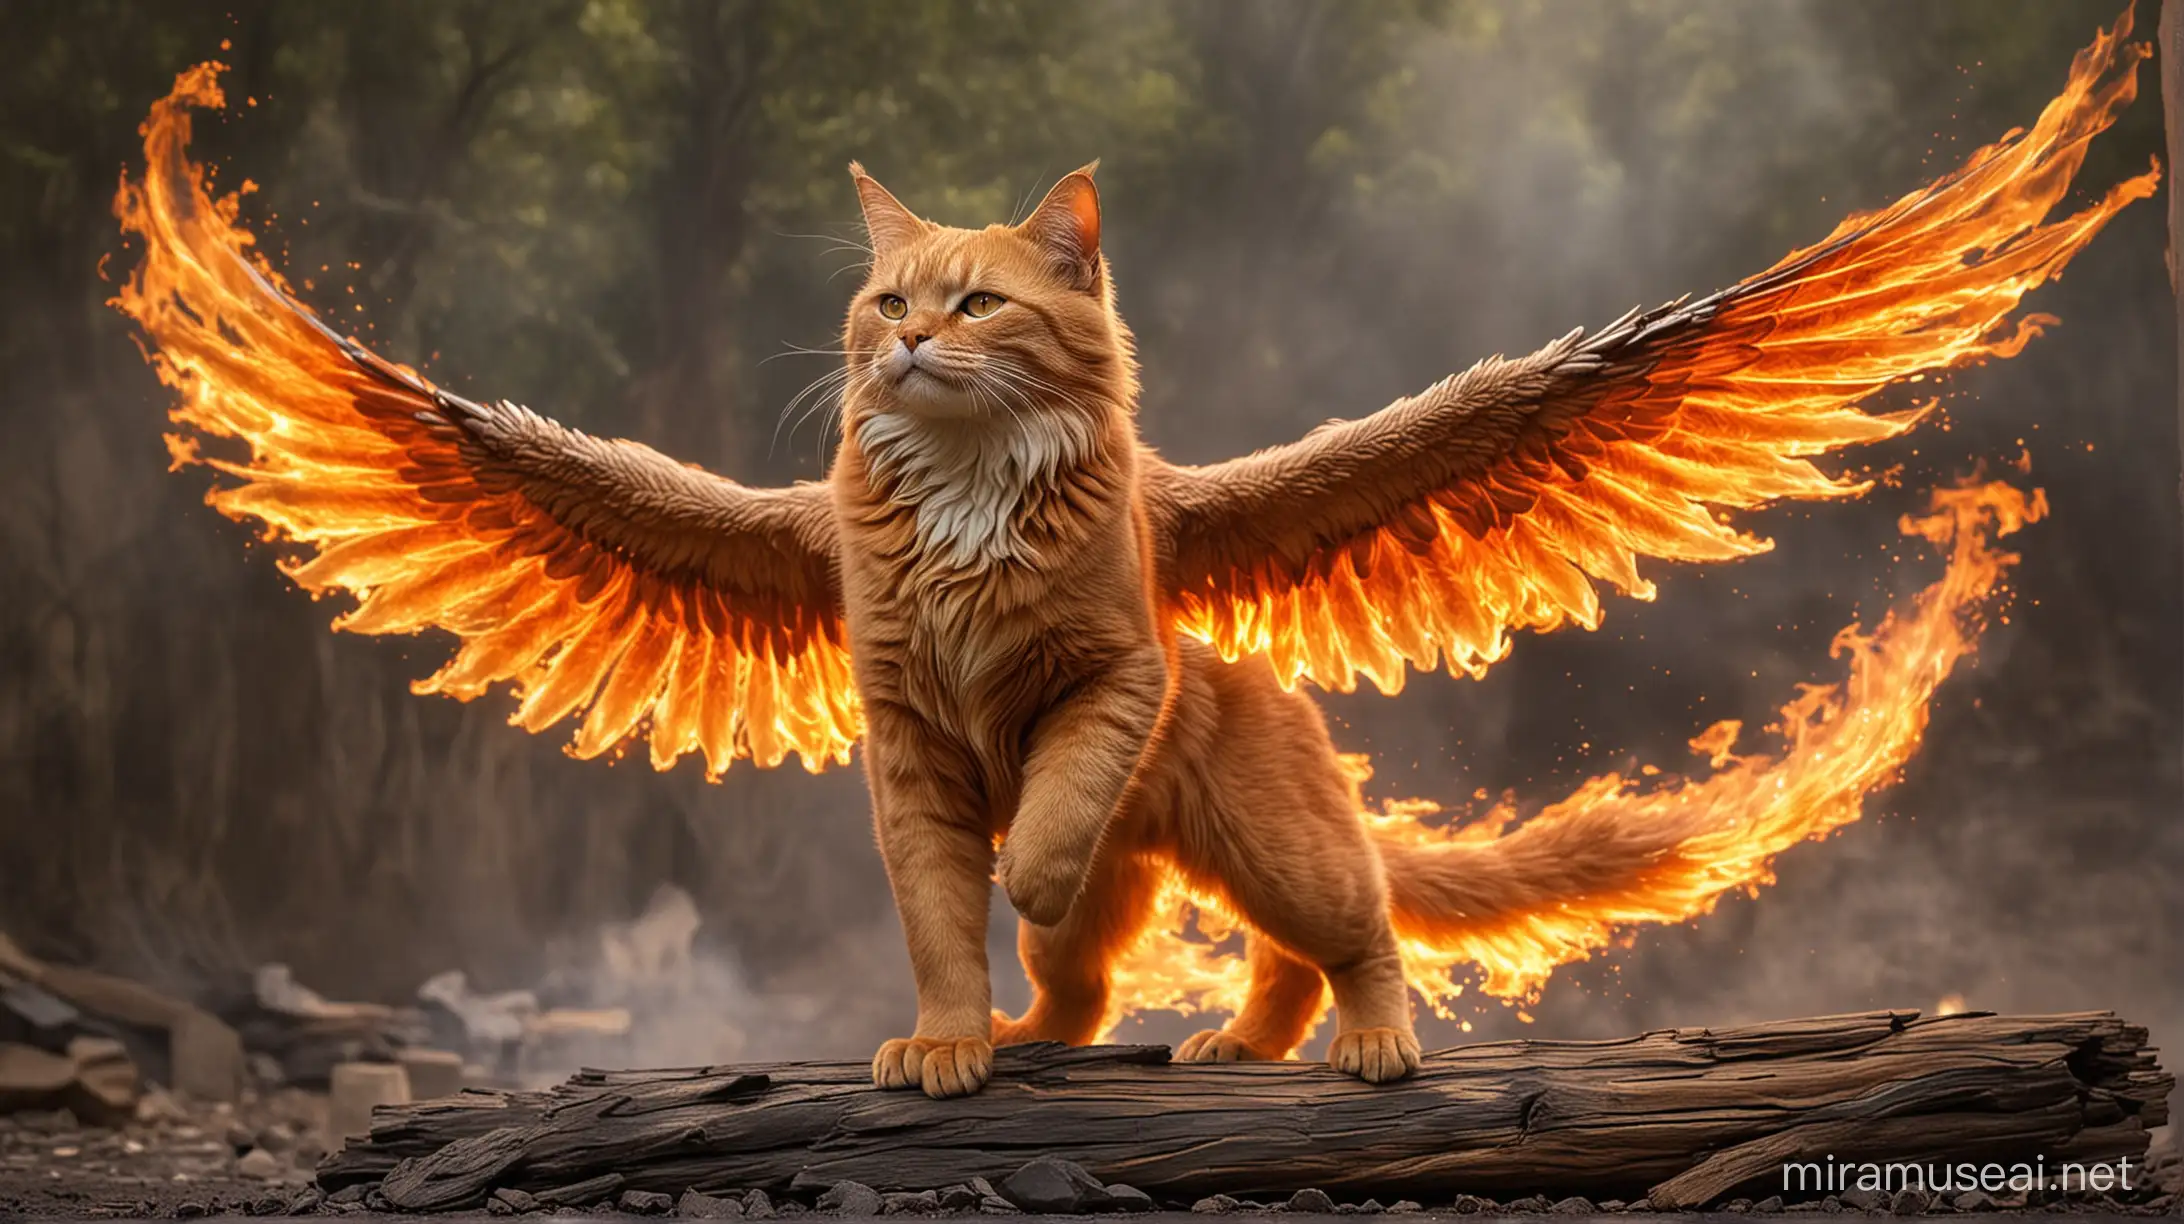 (full body) Fire cat is a magical creature with the body of a cat, ((wings resembling flames)), and fur that can become invisible. The fire cat has the gift of fire control and is able to cause firestorms, create fire walls and control the temperature of the environment. Legend has it that fire cats were created by the gods to protect homes and help people fight fires.